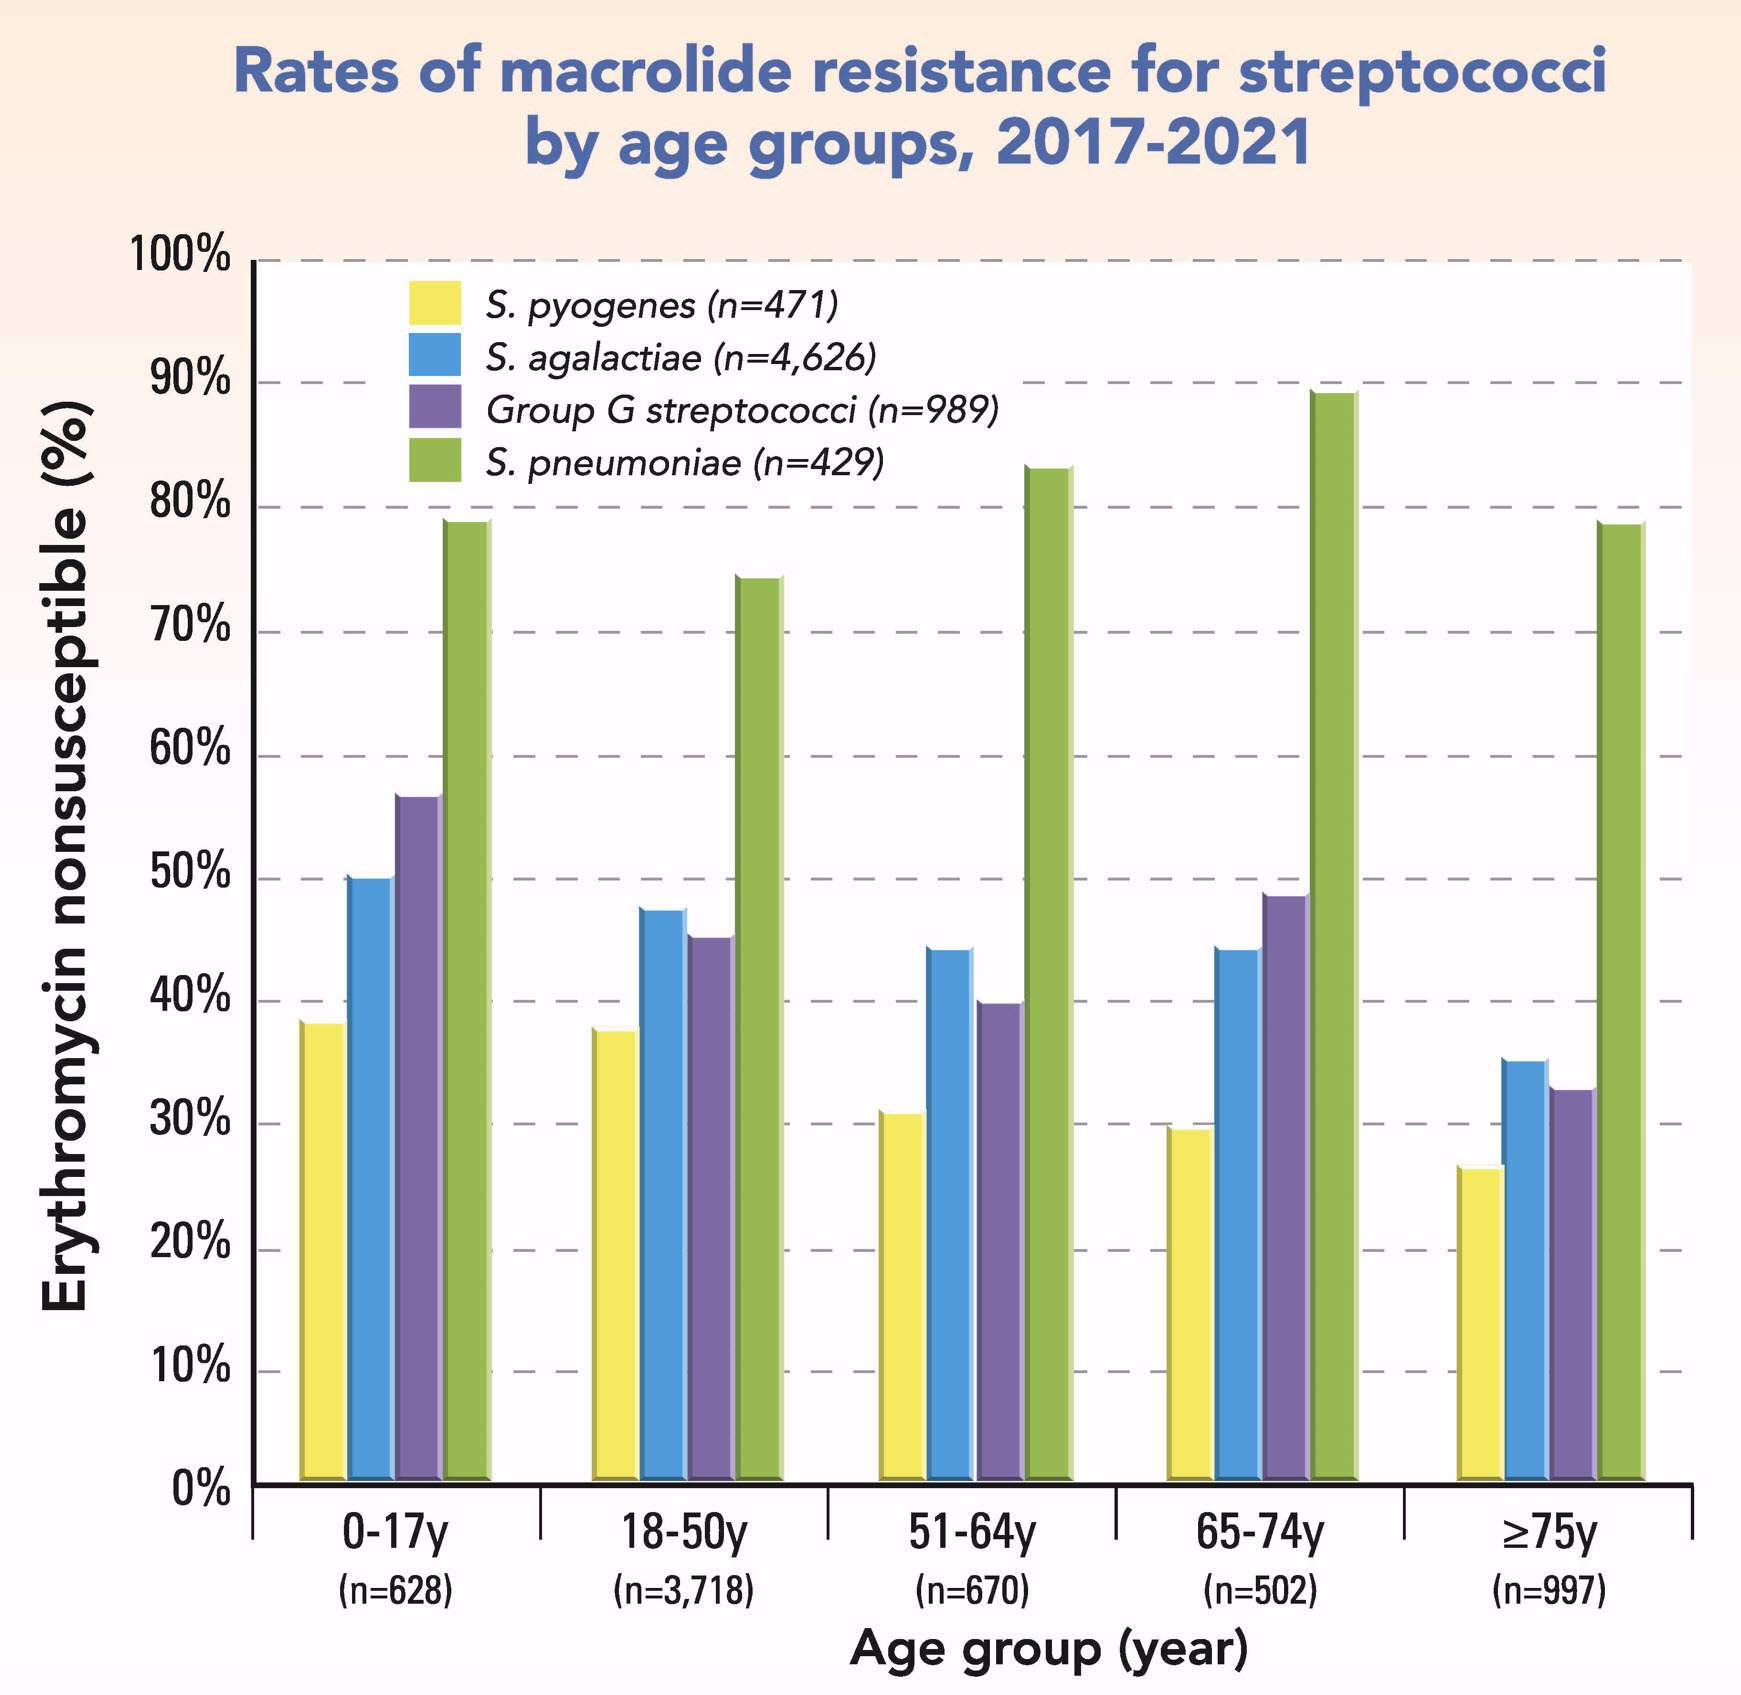 Figure HKW-2. Rates of macrolide resistance for streptococci by age groups, 2017-2021